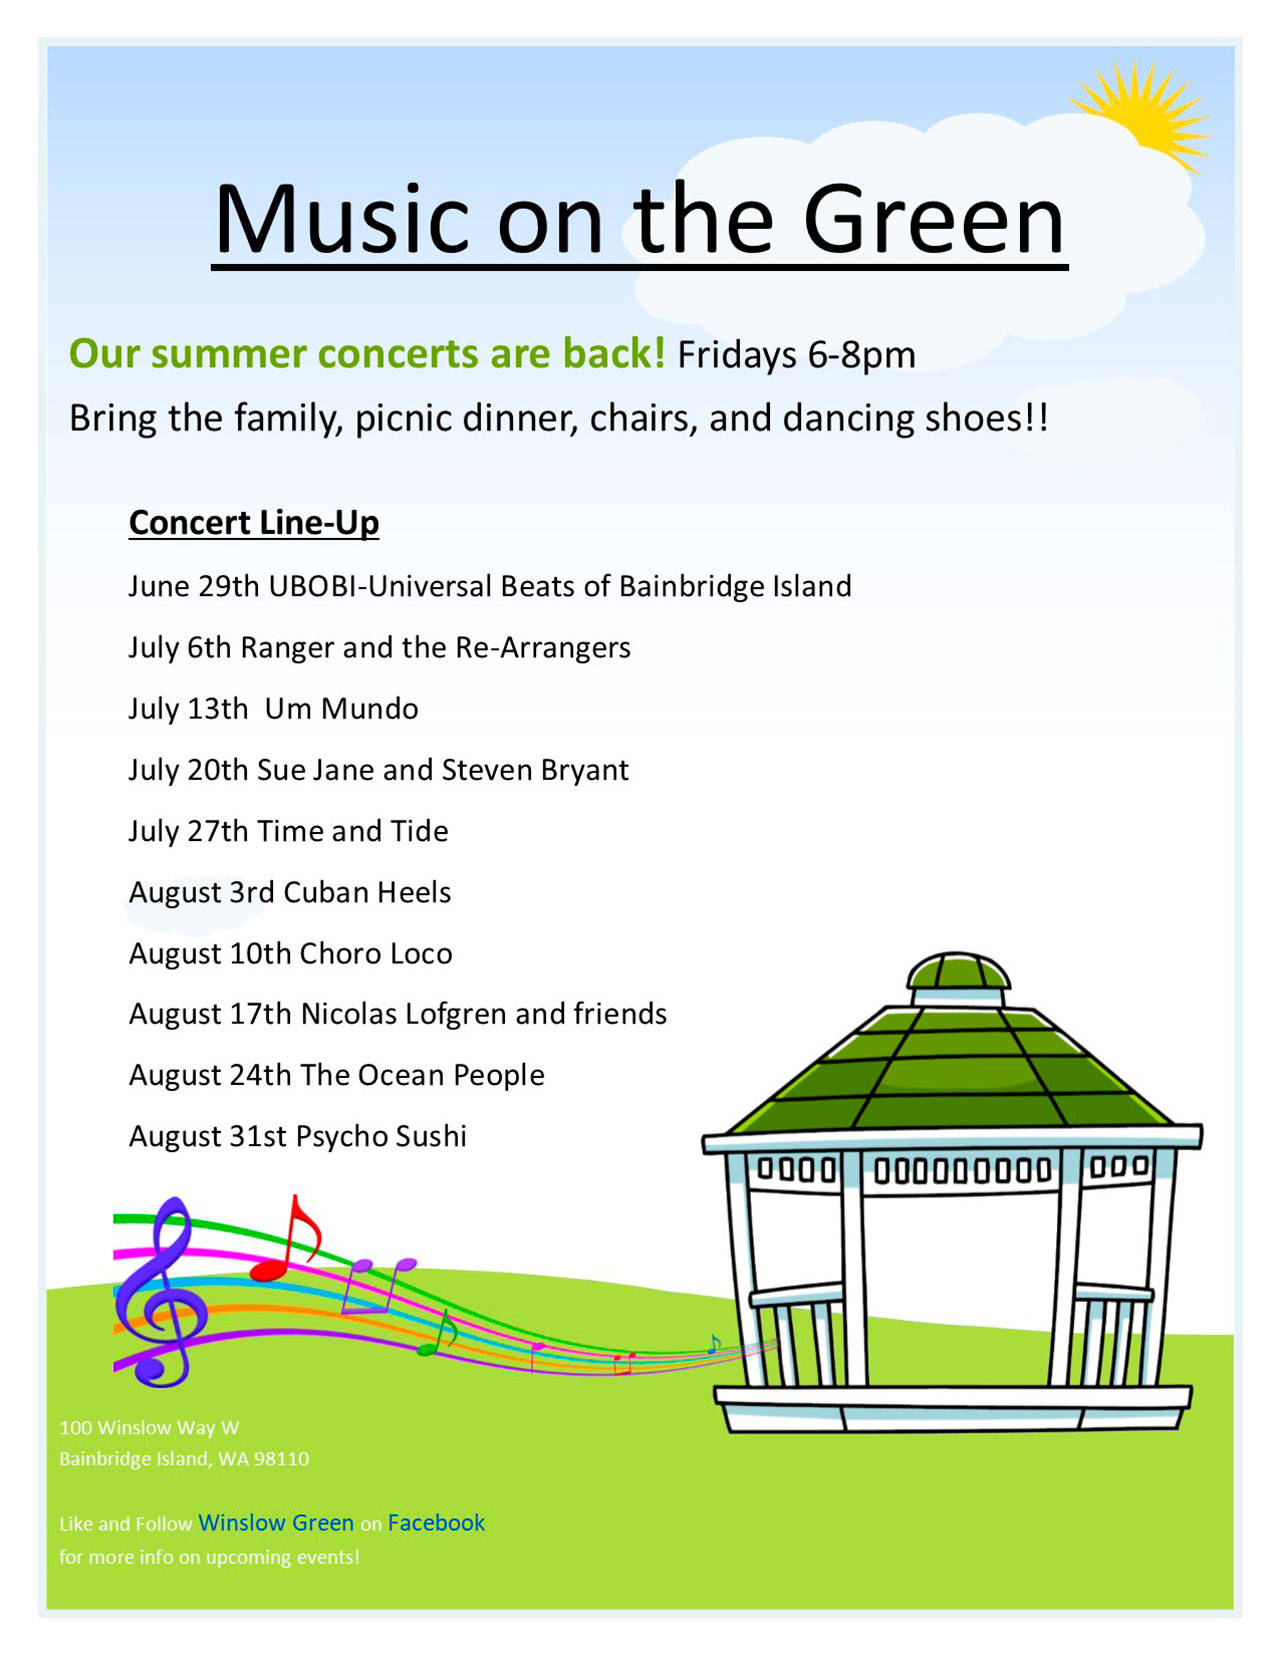 Image courtesy of Marissa Simcoe | The Winslow Green summer concert series Music on the Green will return Friday, June 29 with the first of many free concerts coming to the downtown Winslow outdoor venue.